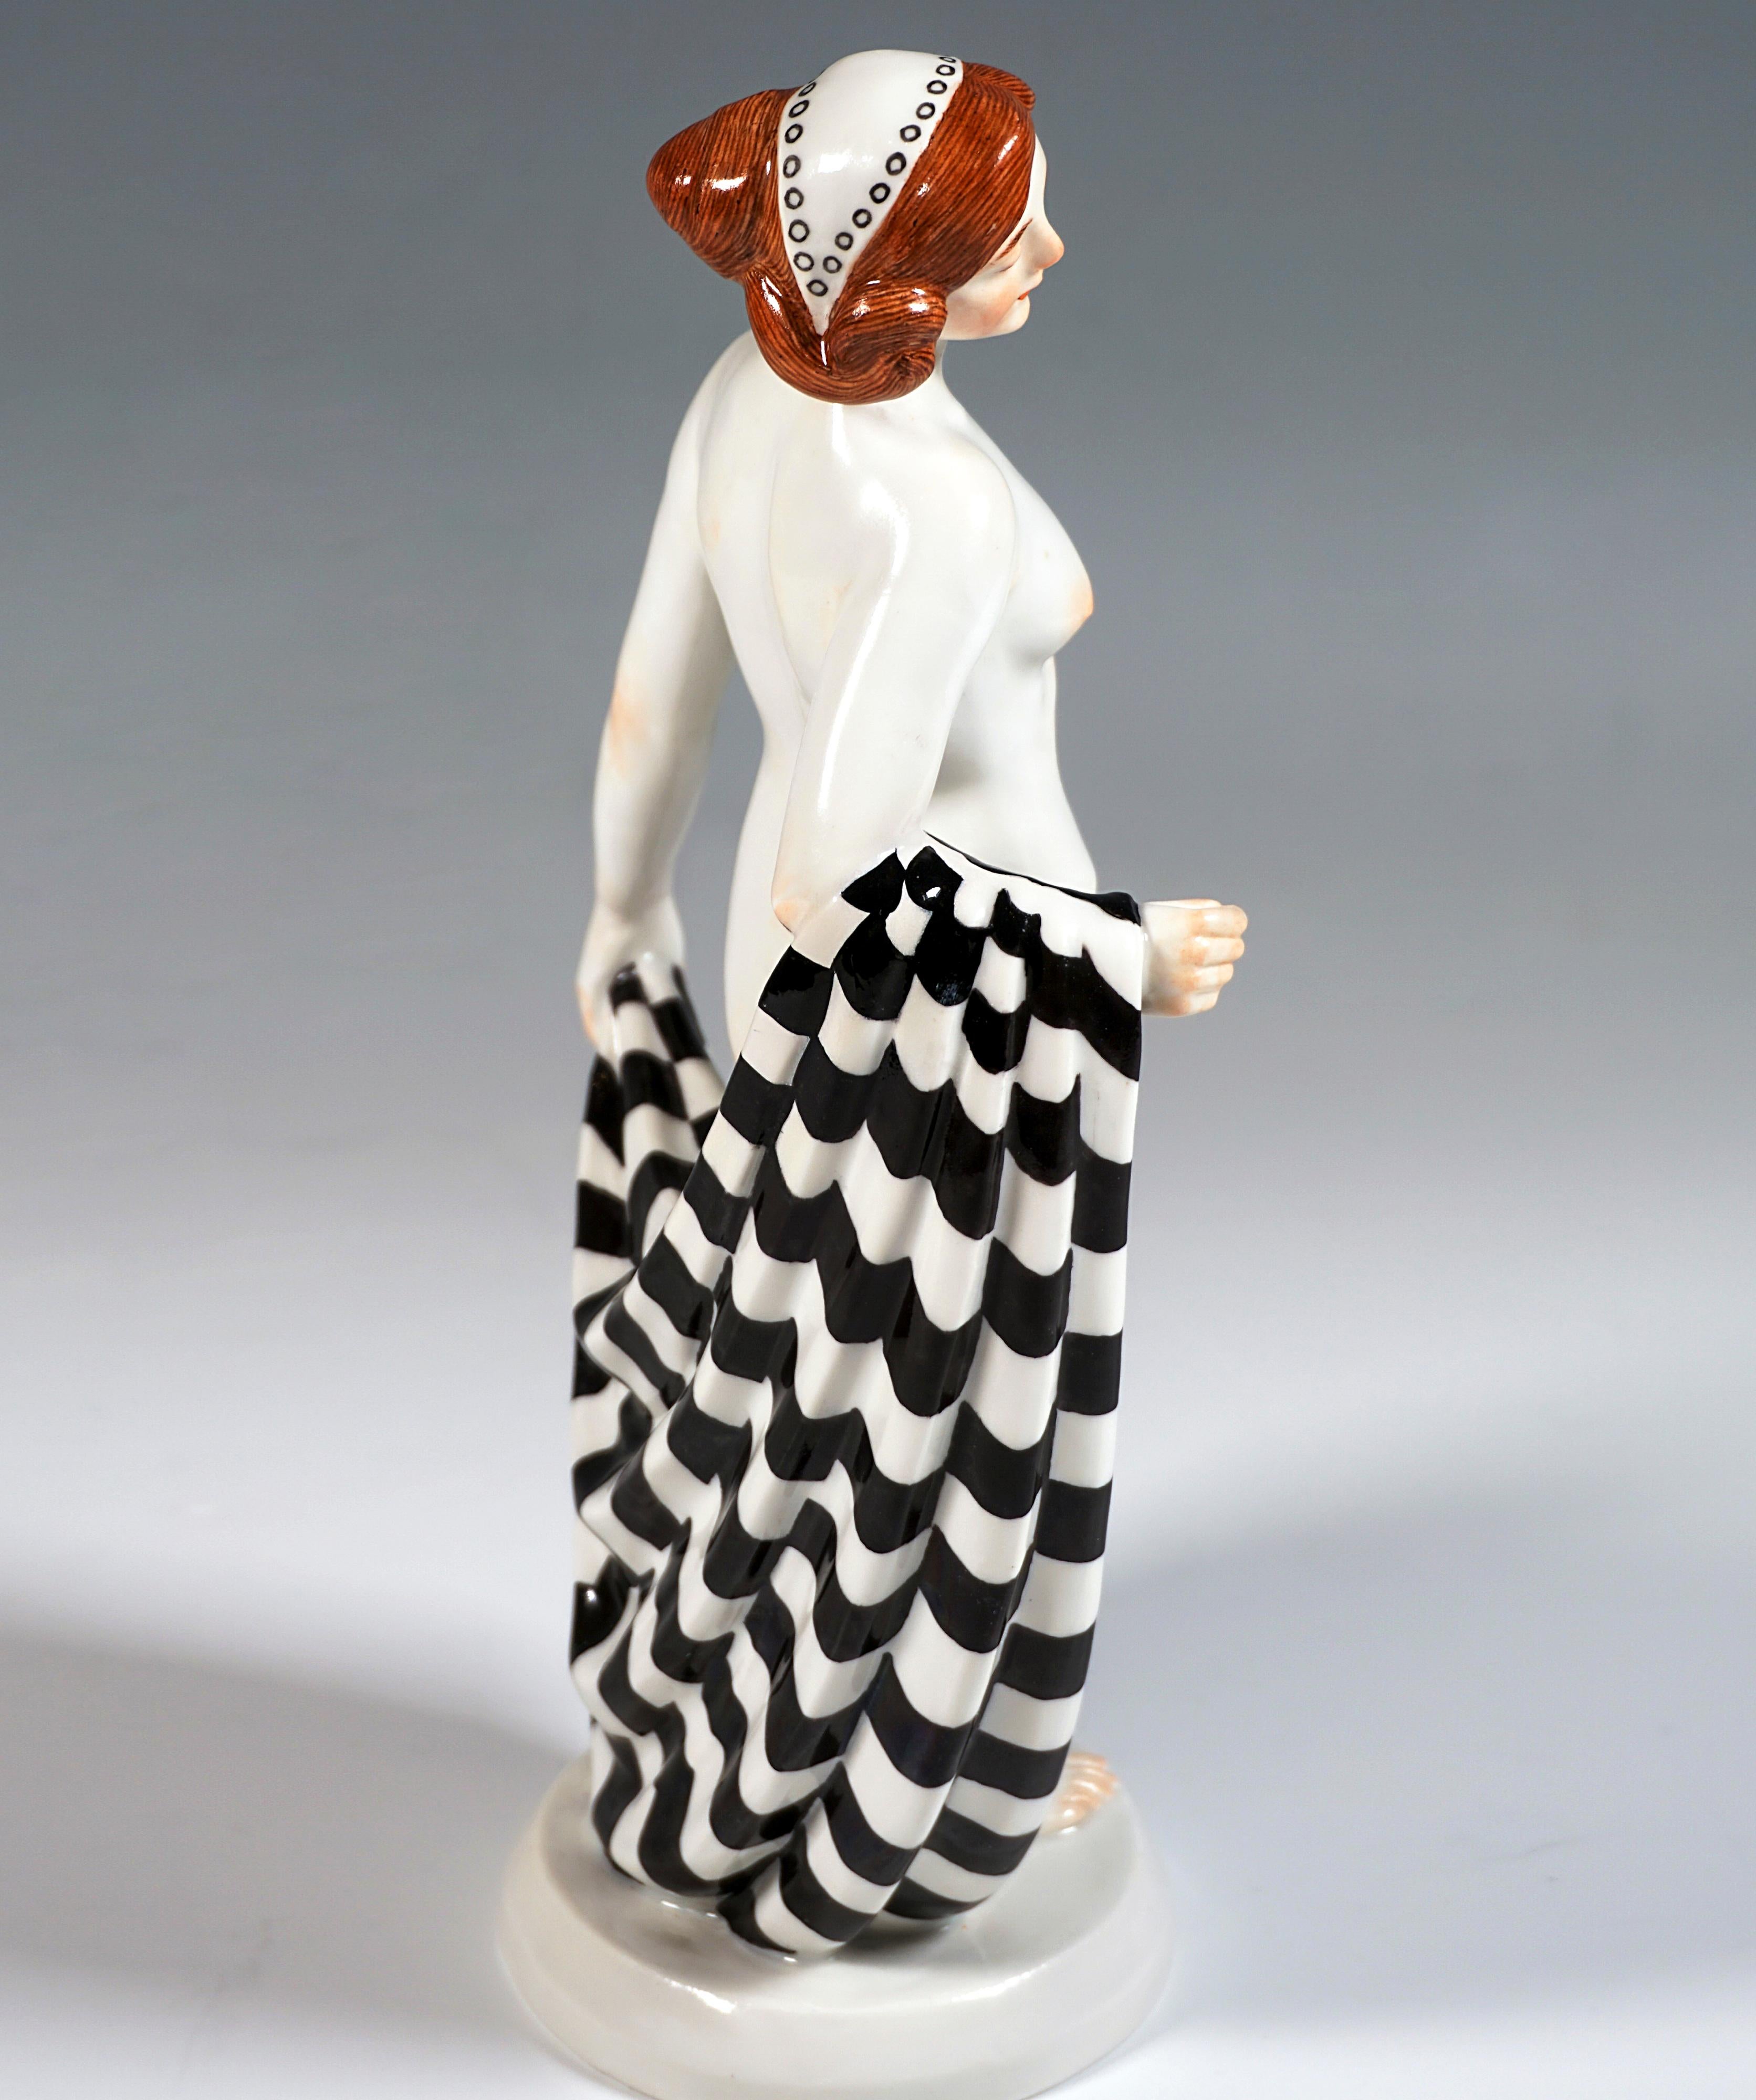 Hand-Crafted Meissen Germany Art Nouveau Figurine Girl With Shawl, by Theodor Eichler, c 1913 For Sale